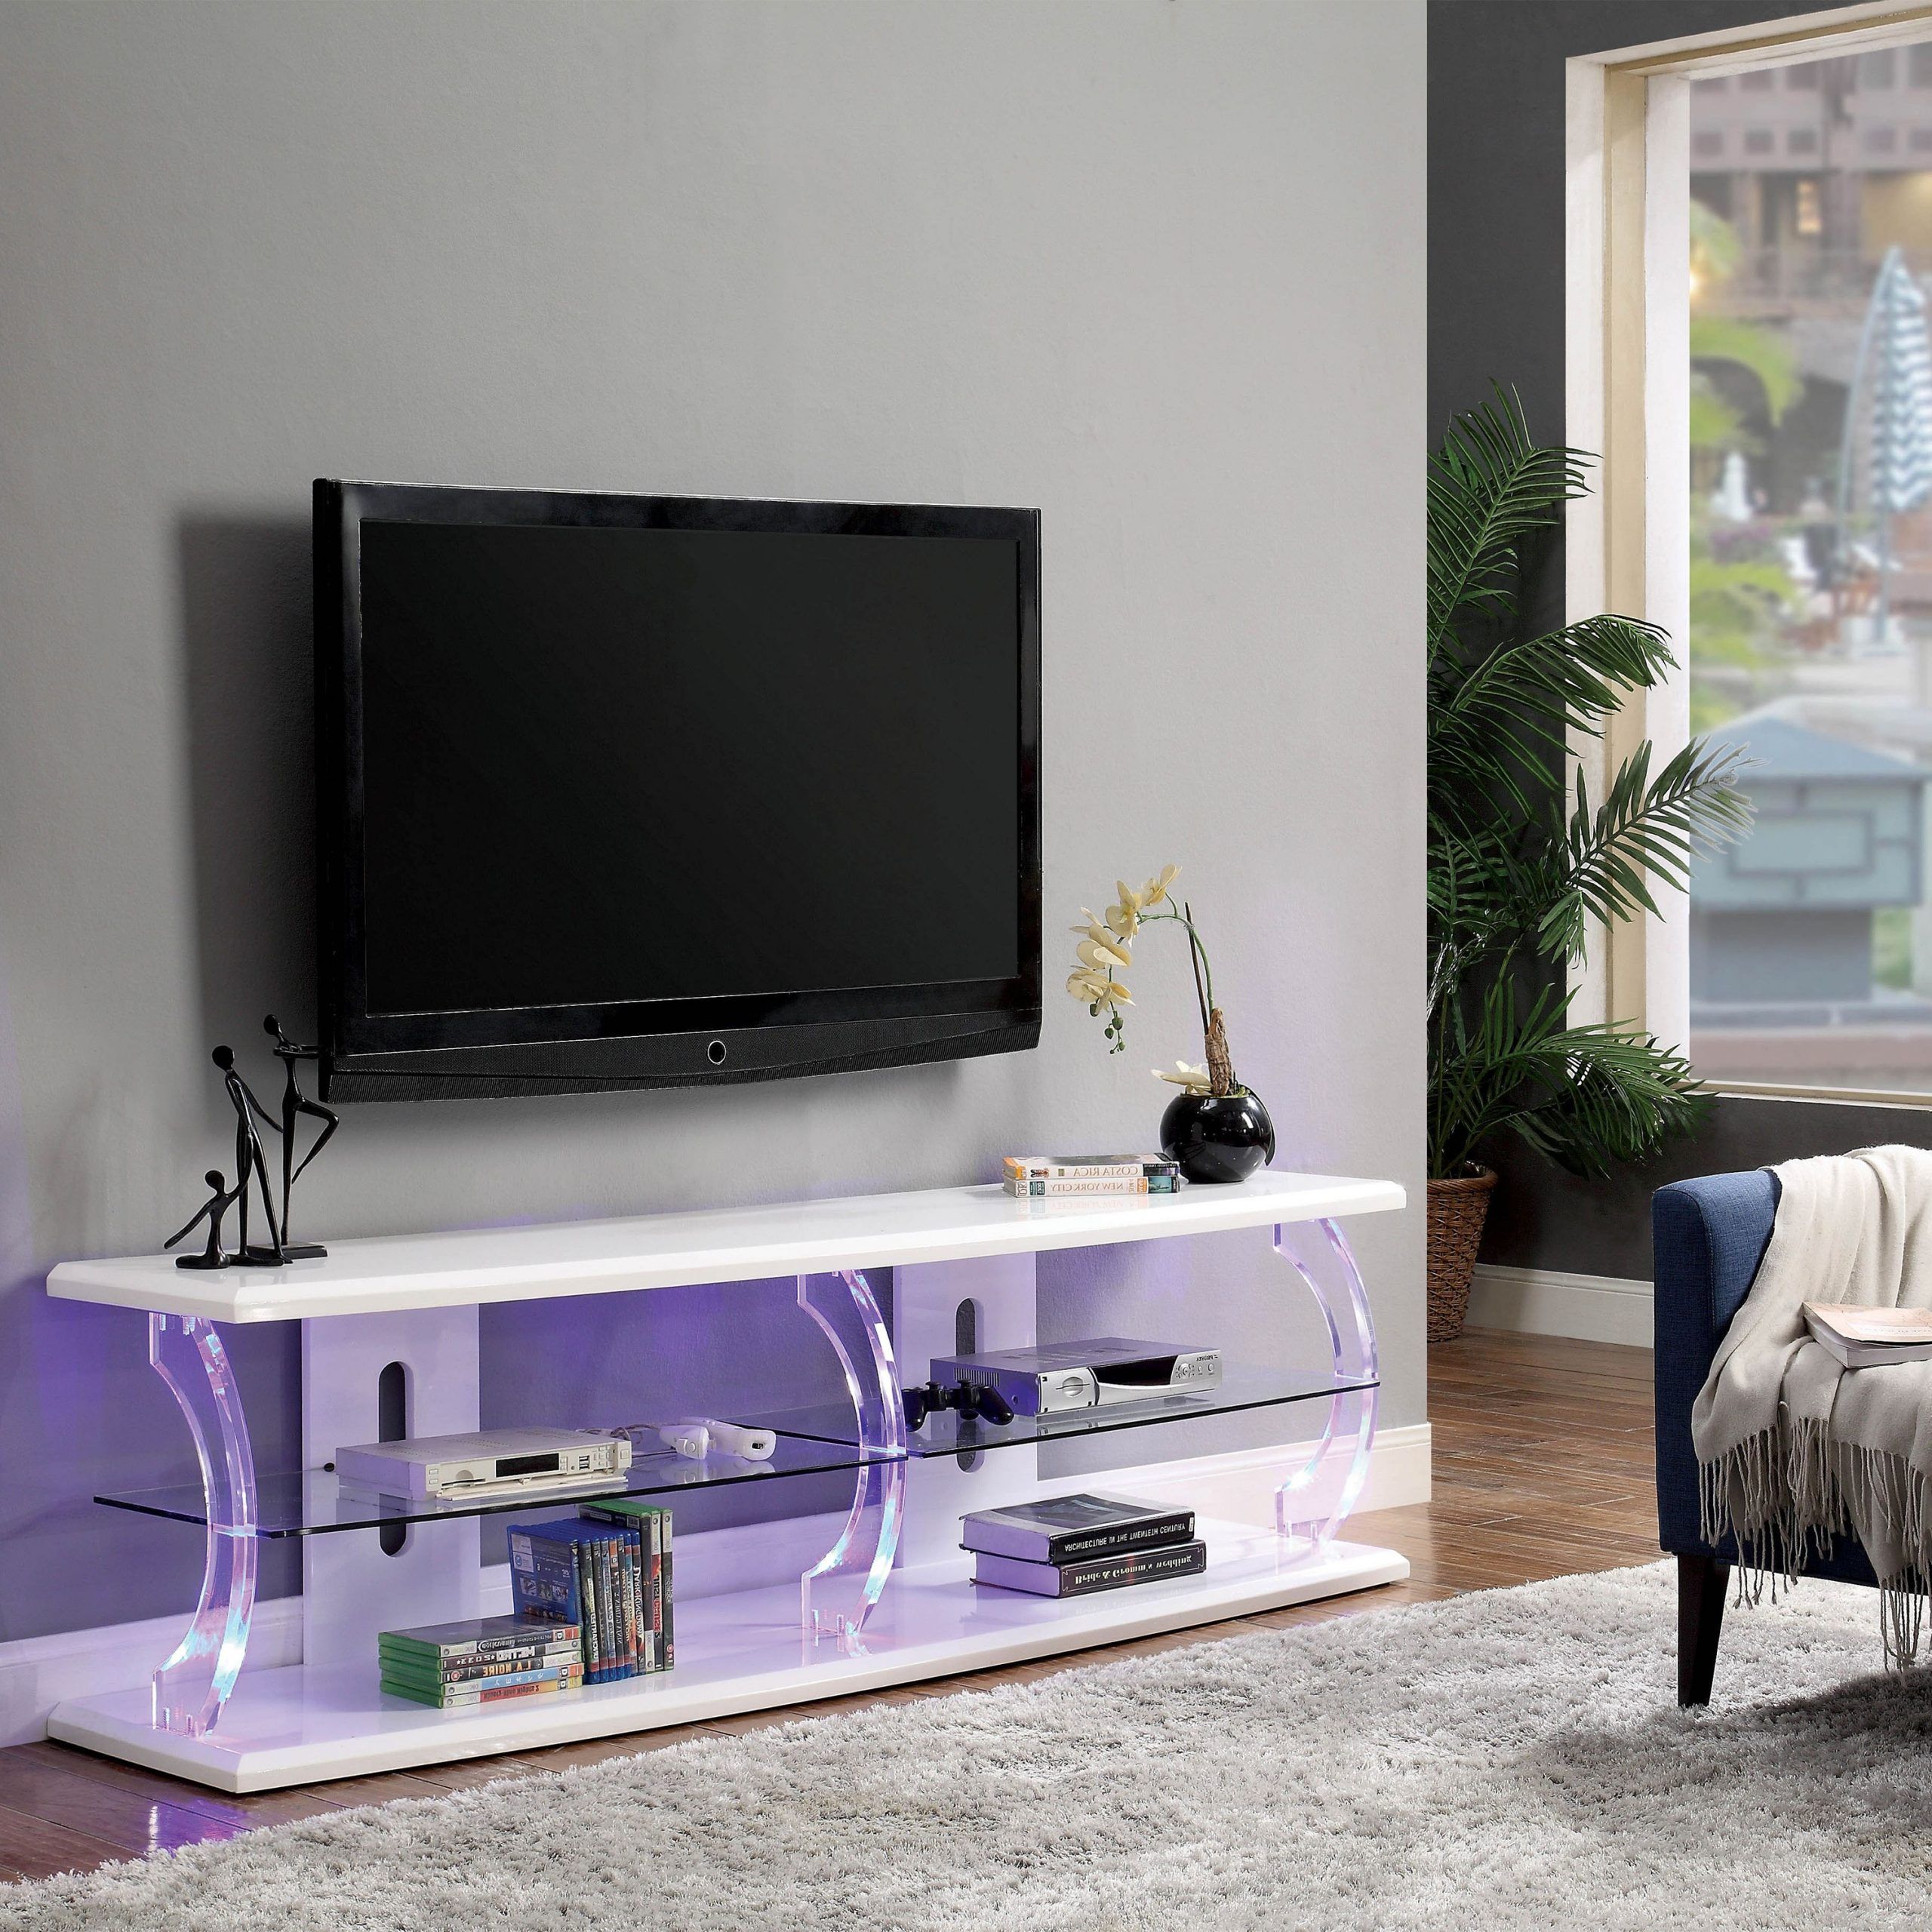 Furniture Of America Daley Modern White 60 Inch Led Tv Throughout Polar Led Tv Stands (Gallery 4 of 20)